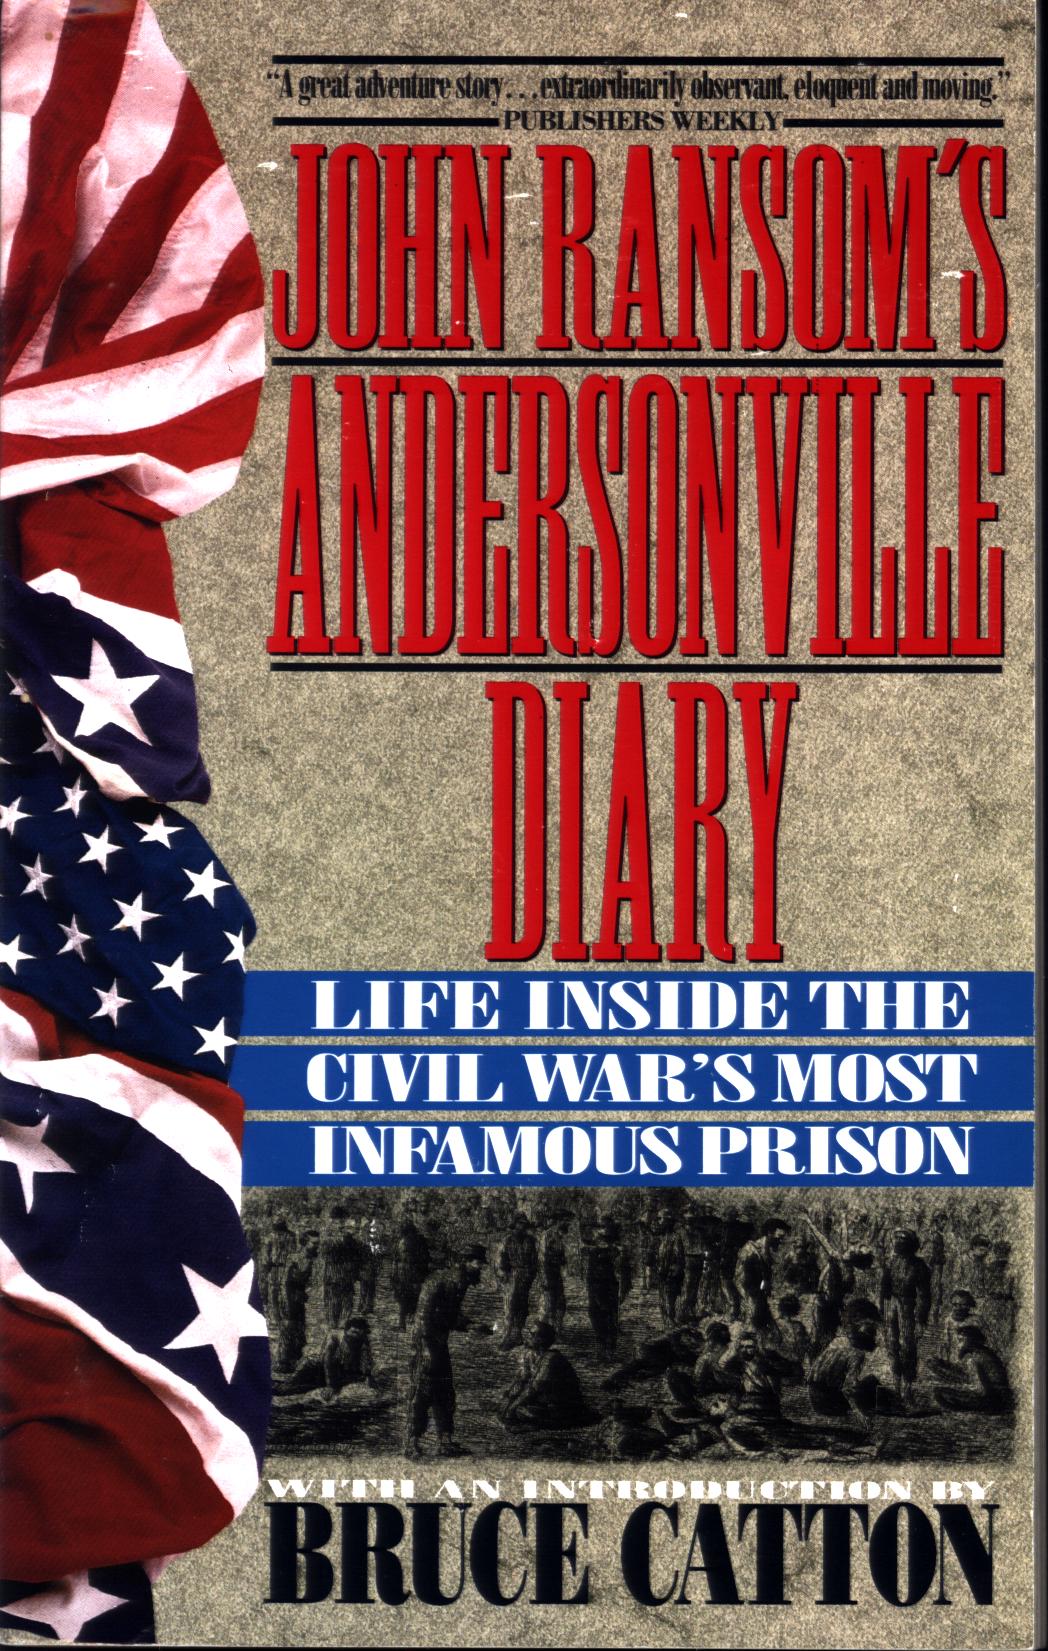 JOHN RANSOM'S ANDERSONVILLE DIARY: life inside the Civil War's most famous prison